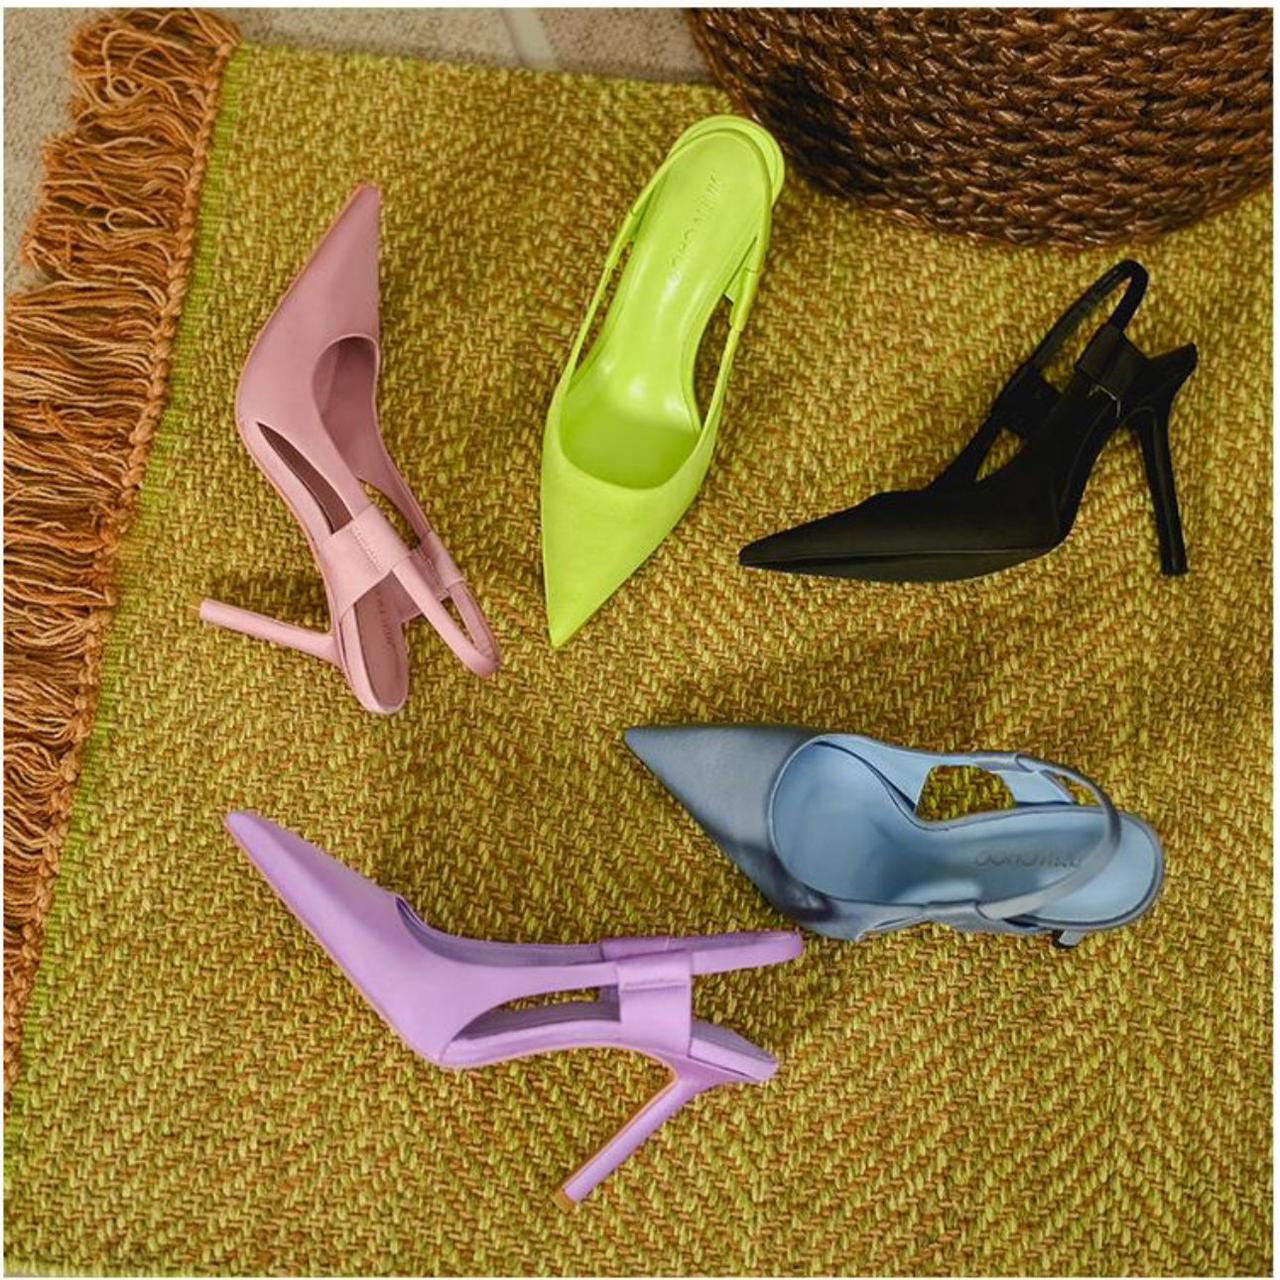 ZJEOQOQ high heel sandals with ankle ties (Red/Green/Black/Purple), Hot sale  fashion sexy solid color elegant pointed stiletto high heels outdoor sandals  high quality women shoes - Walmart.com